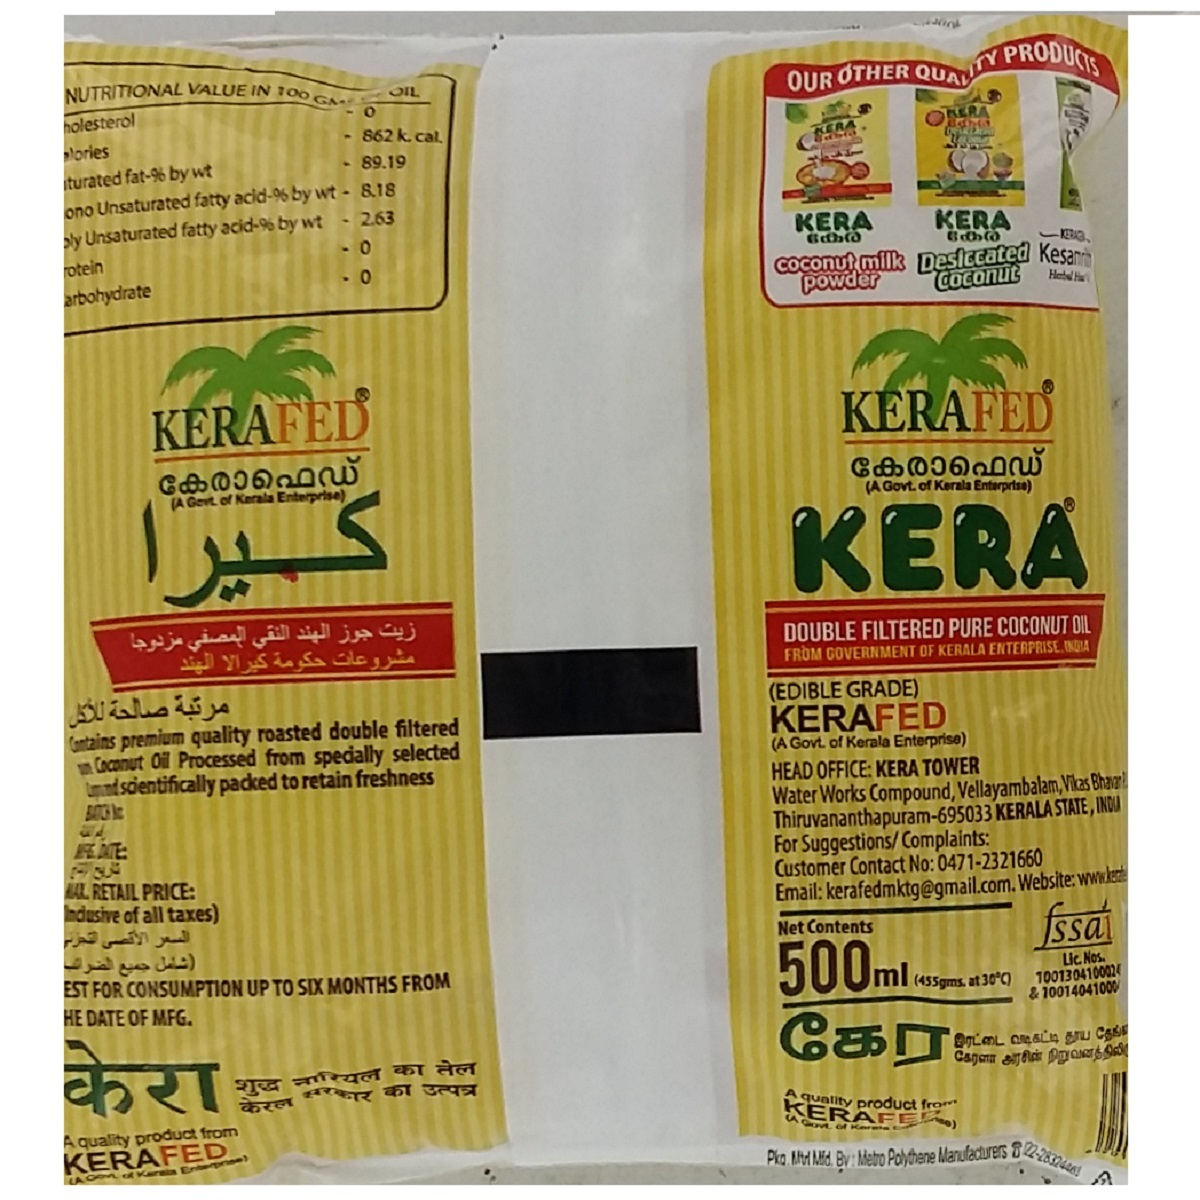 Kera Double Filtered Coconut Oil Pouch 500ml